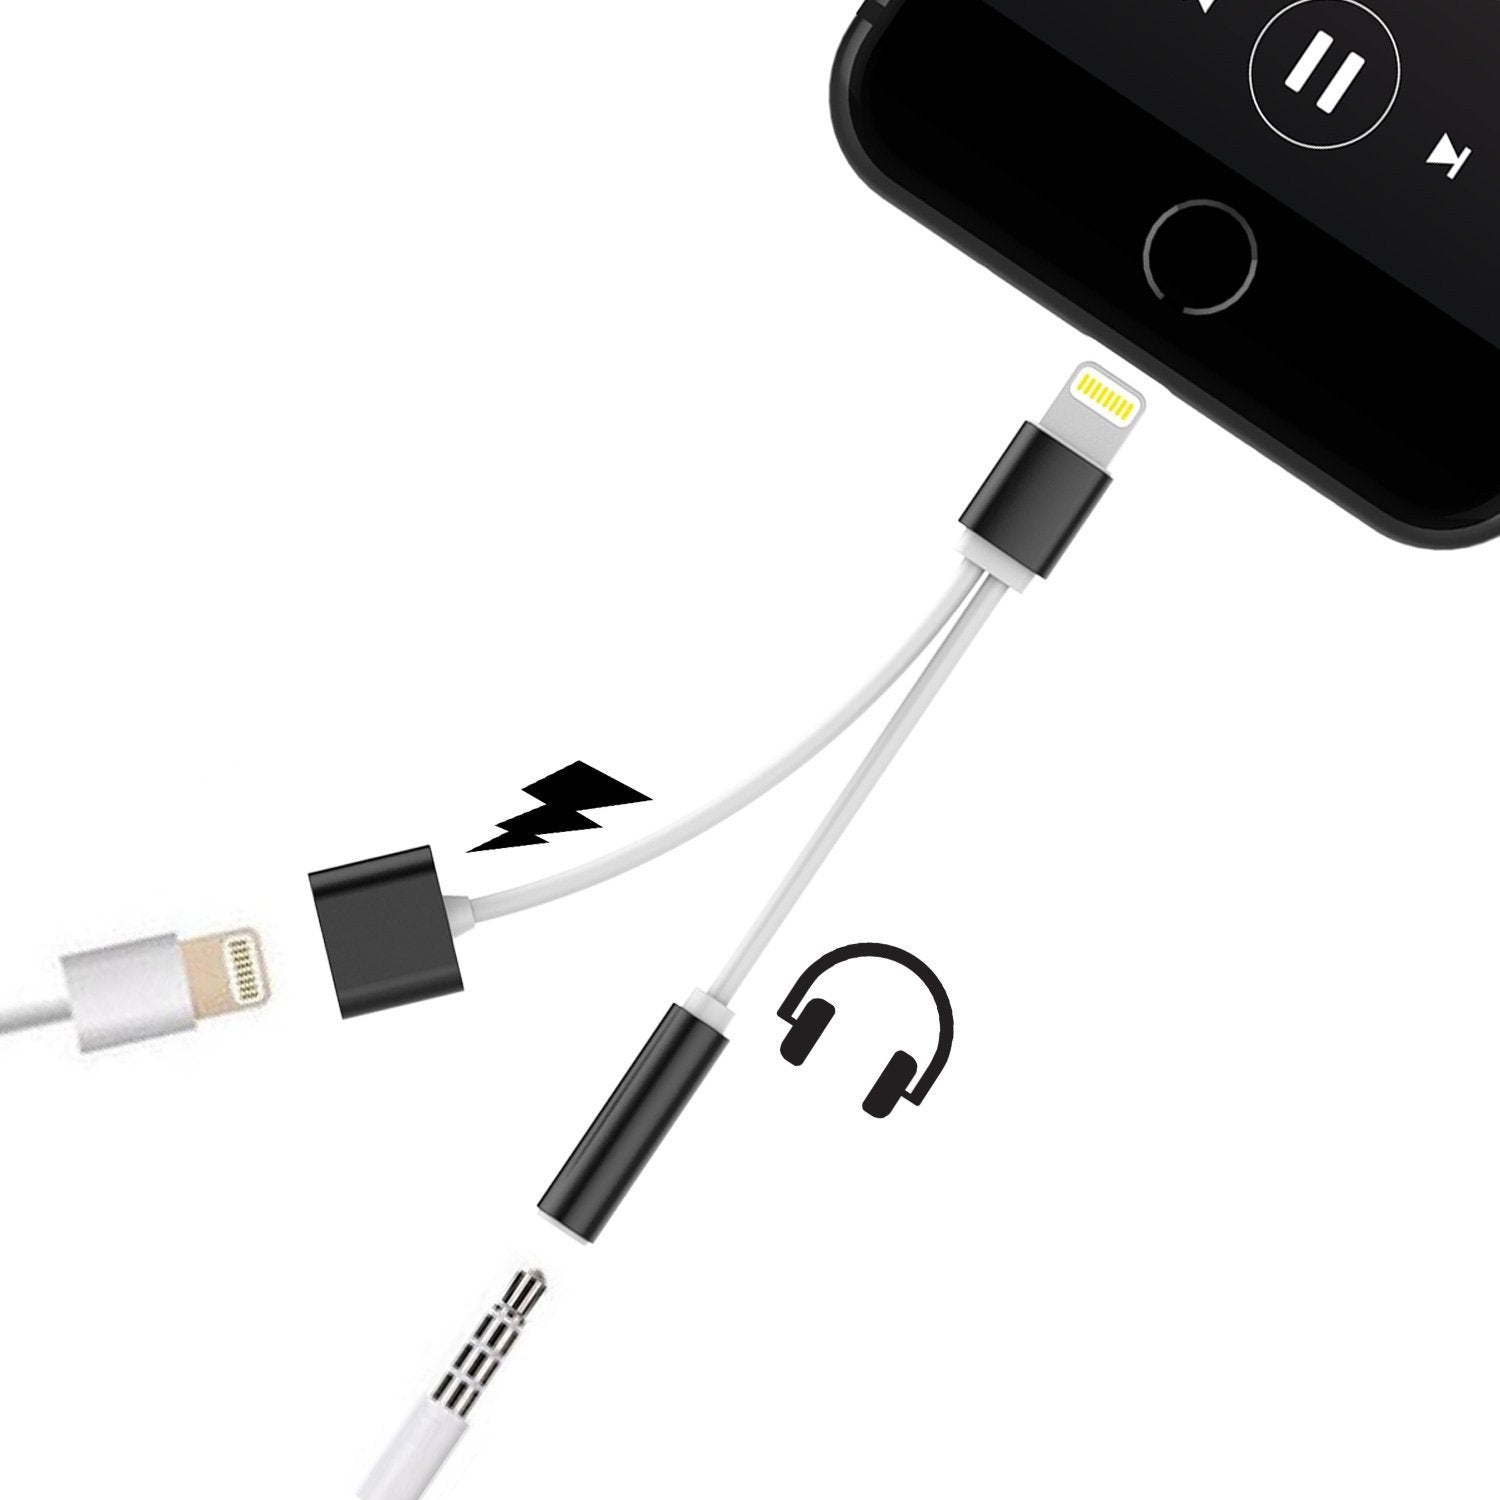 PUNKZAP Lightning Adapter Cable 2 in 1 Splitter Charger with 3.5mm Earphone AUX Jack|Charge & Listen to your Apple iPhone X/8/7/6s/6/5s/5 8+/7+/6+/6S+ Plus [BLACK]